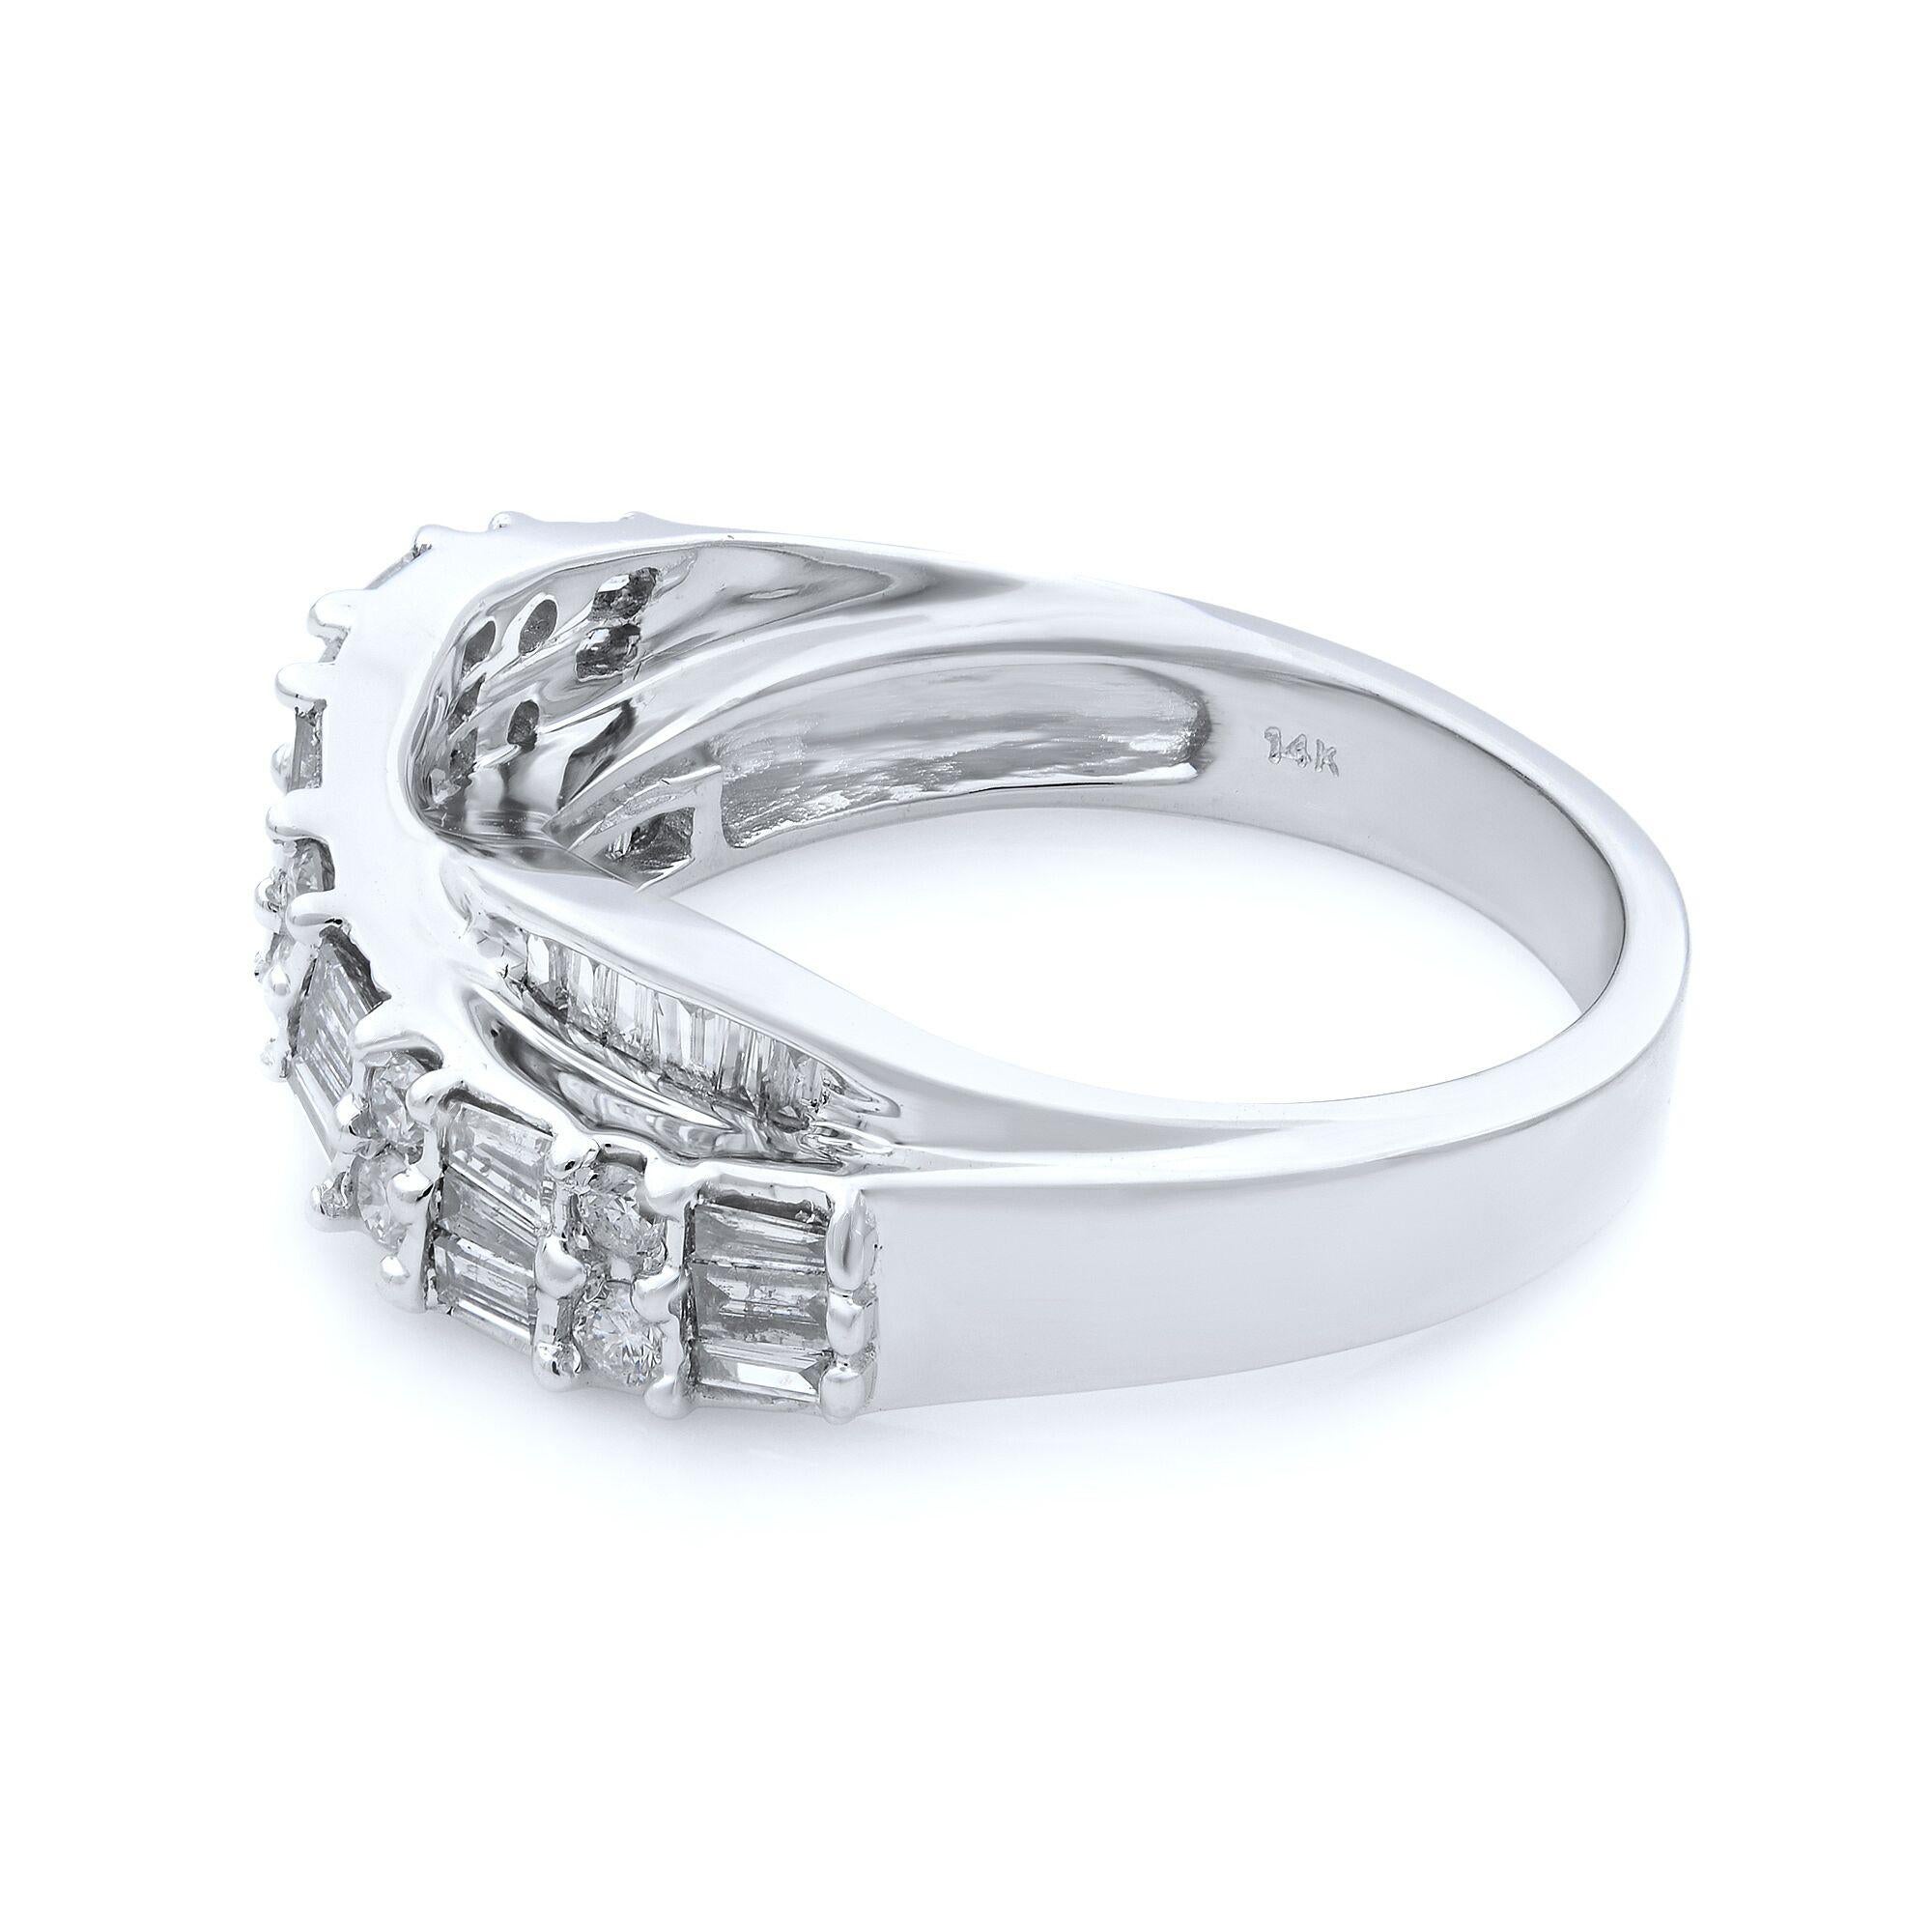 This diamond band containing 1.00cttw of baguette and round cut diamonds is set in 14K white gold. The diamonds are VS1 clarity and J color. The band features an infinity twist for a unique look. Ring Size 7. Comes with a presentable gift box. 